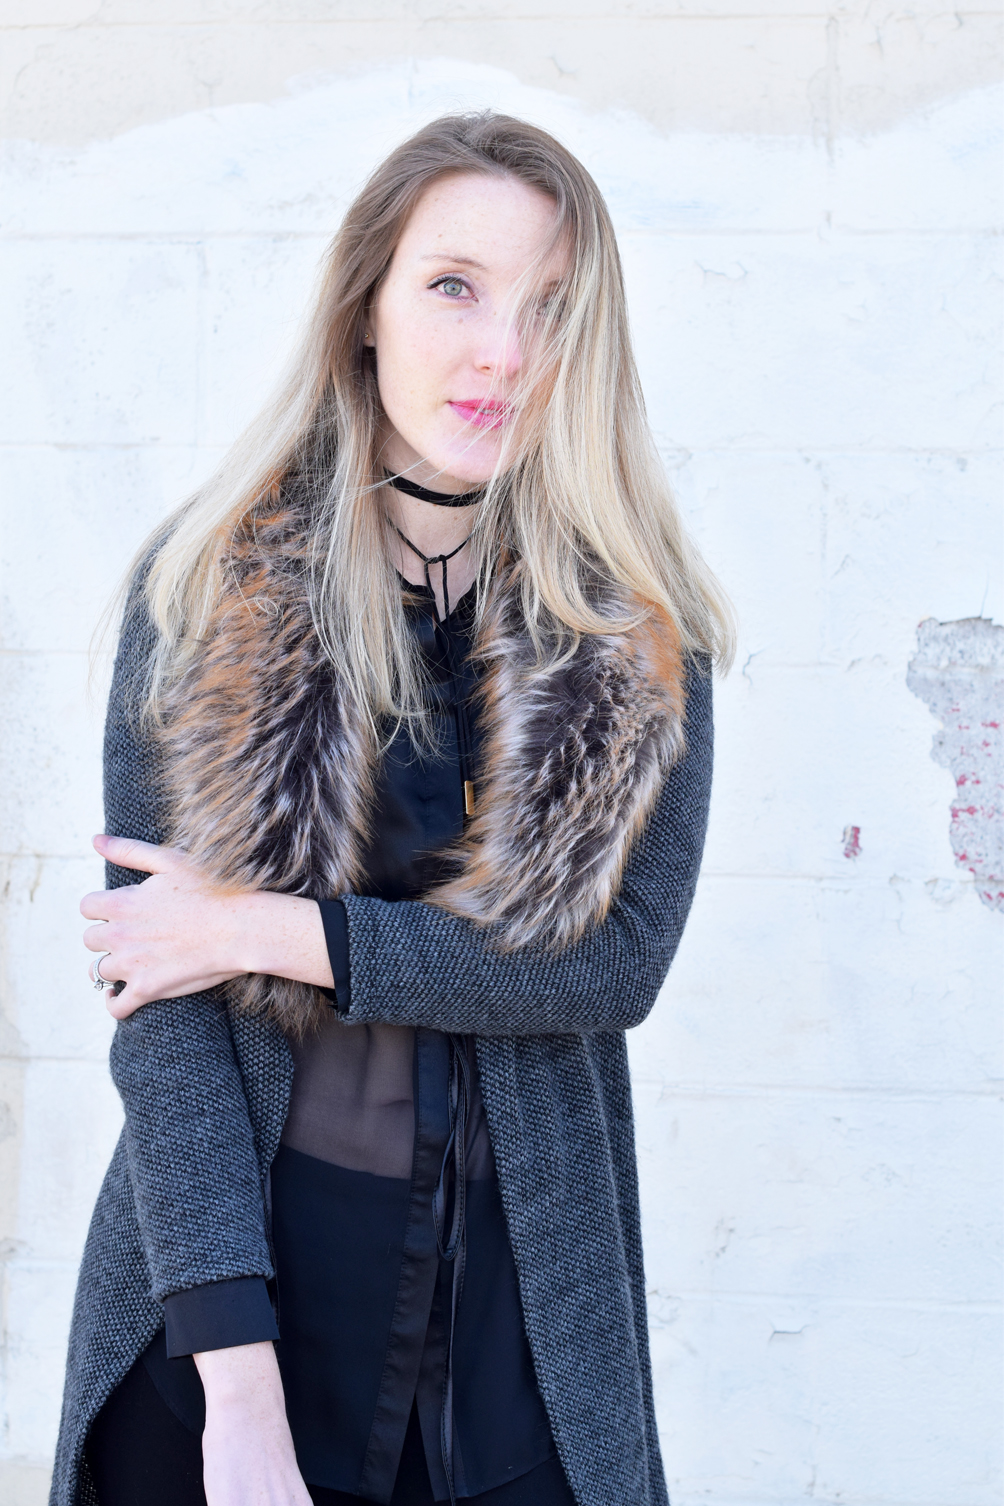 sheer blouse and fur trim cardigan - one brass fox